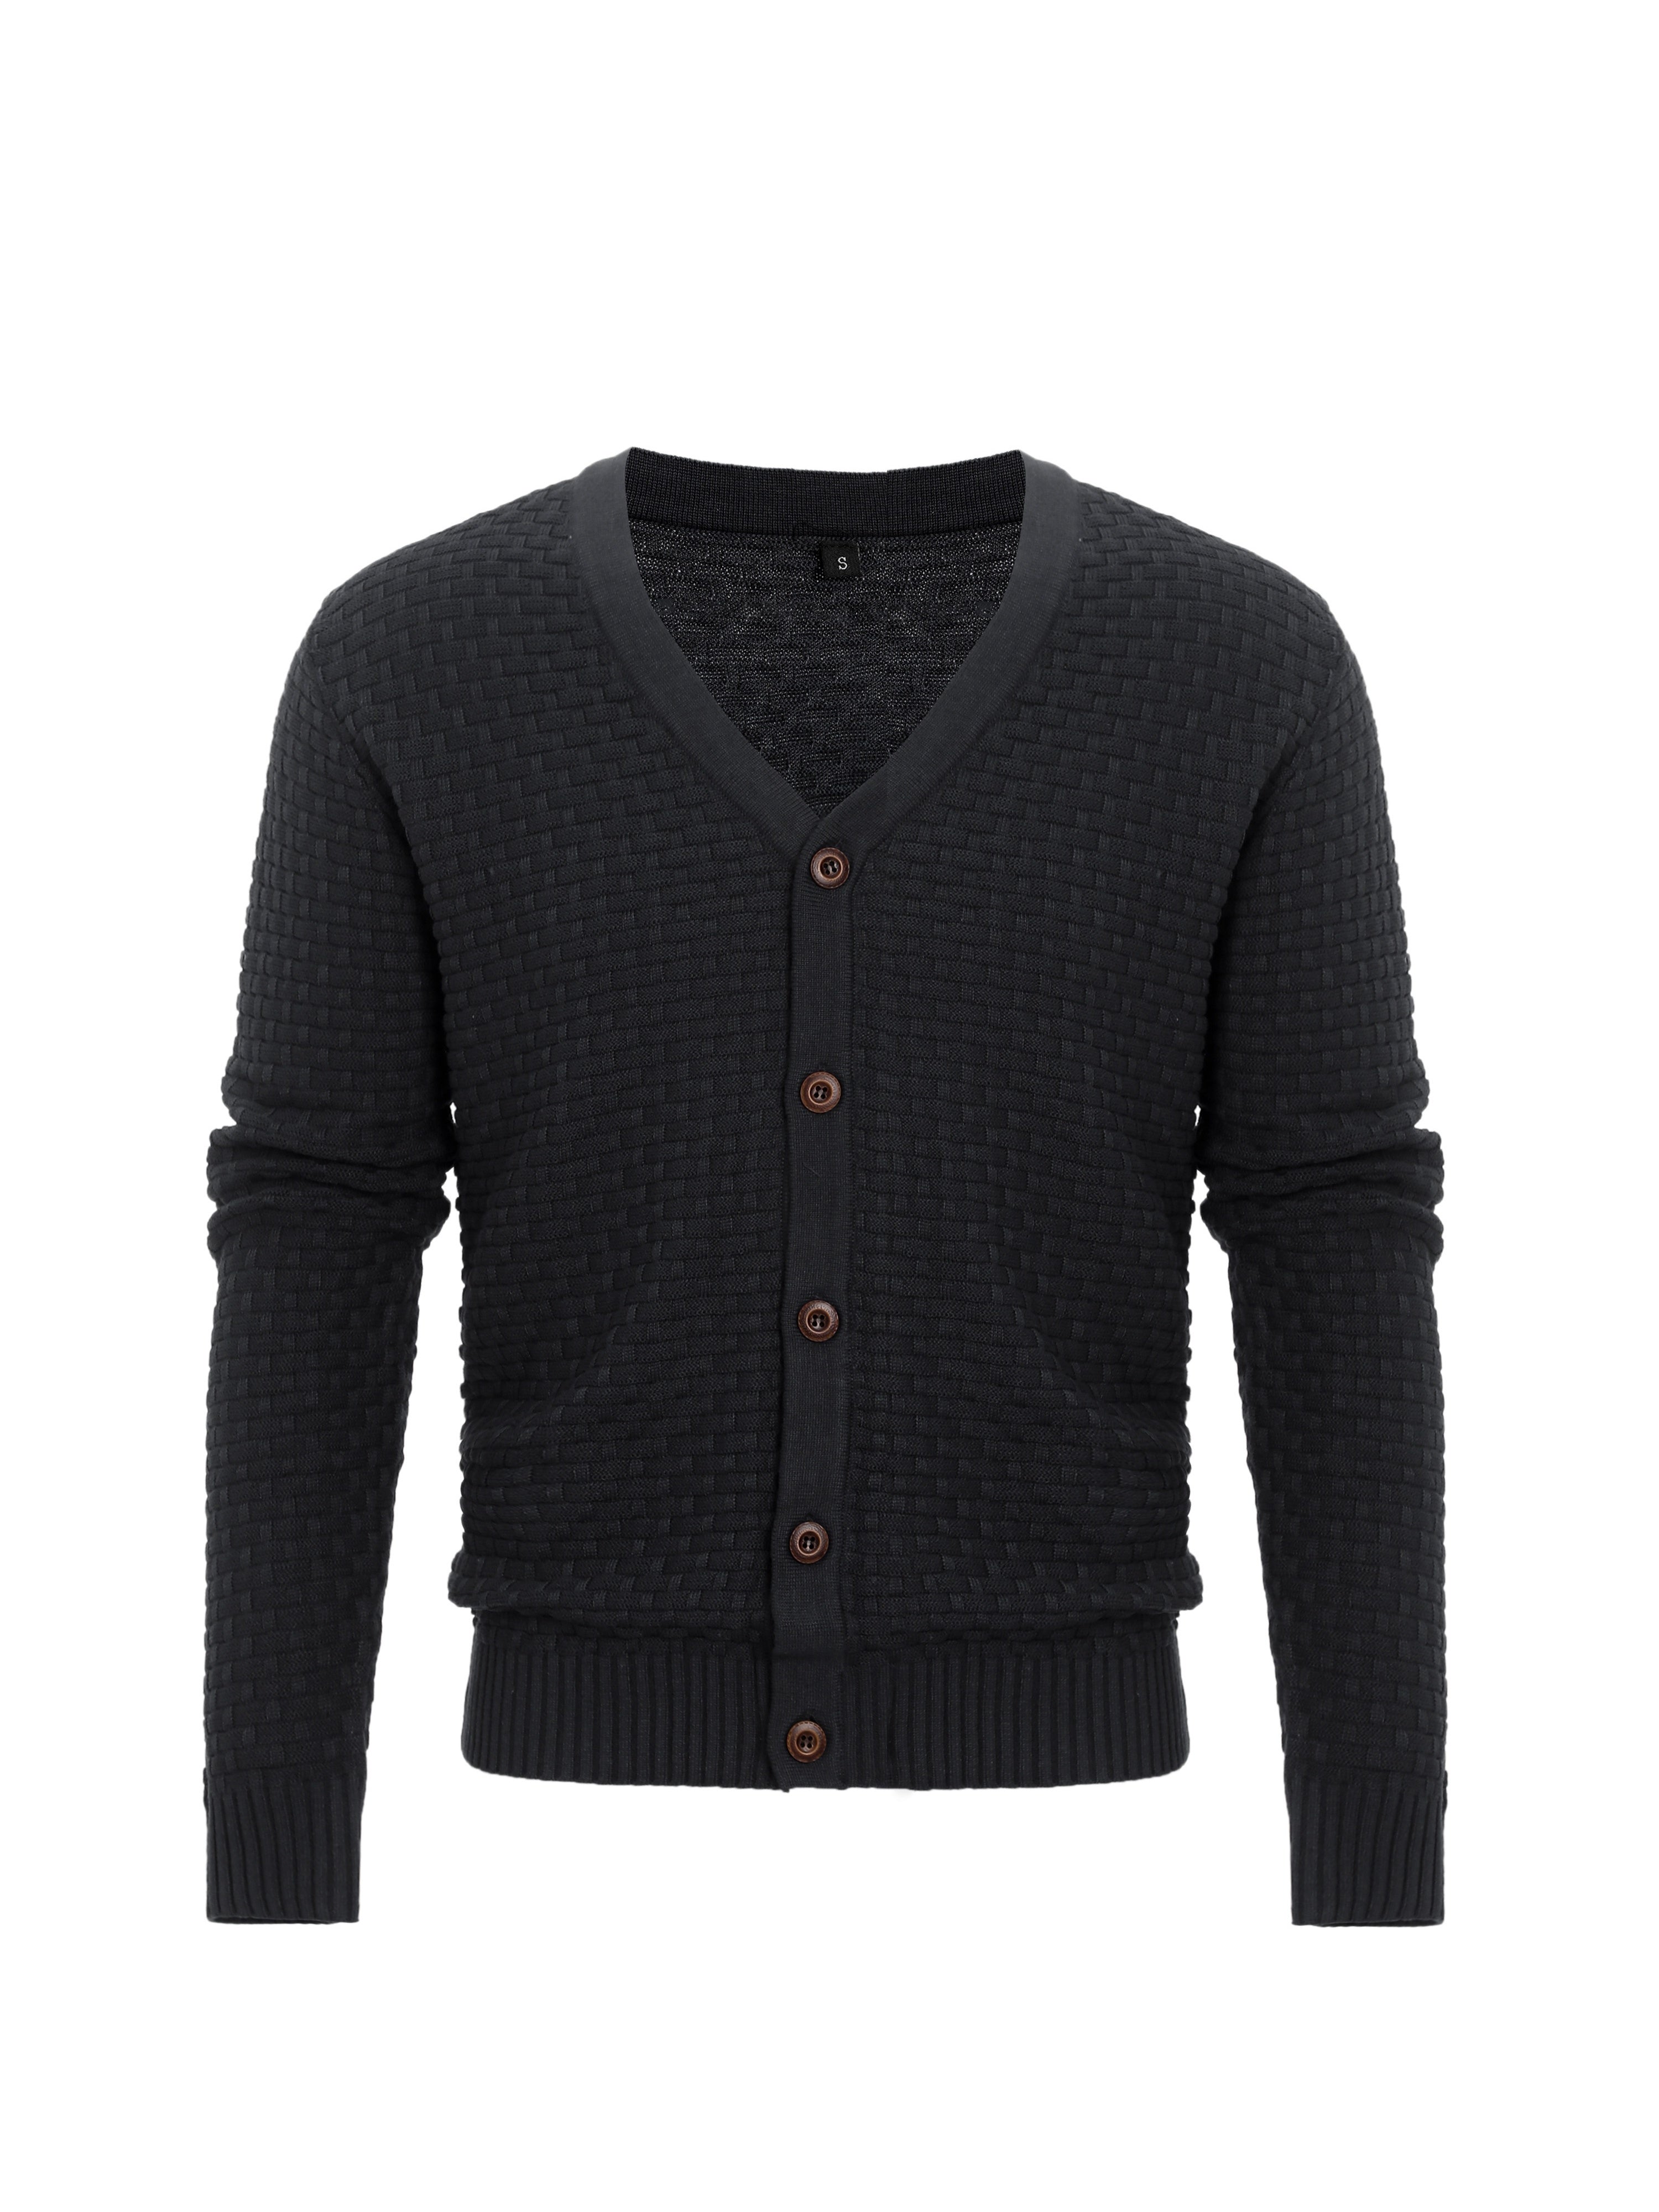 Men's New Knitted Sweater Cardigan Fashion Casual Men's V-neck Button Sweater Men